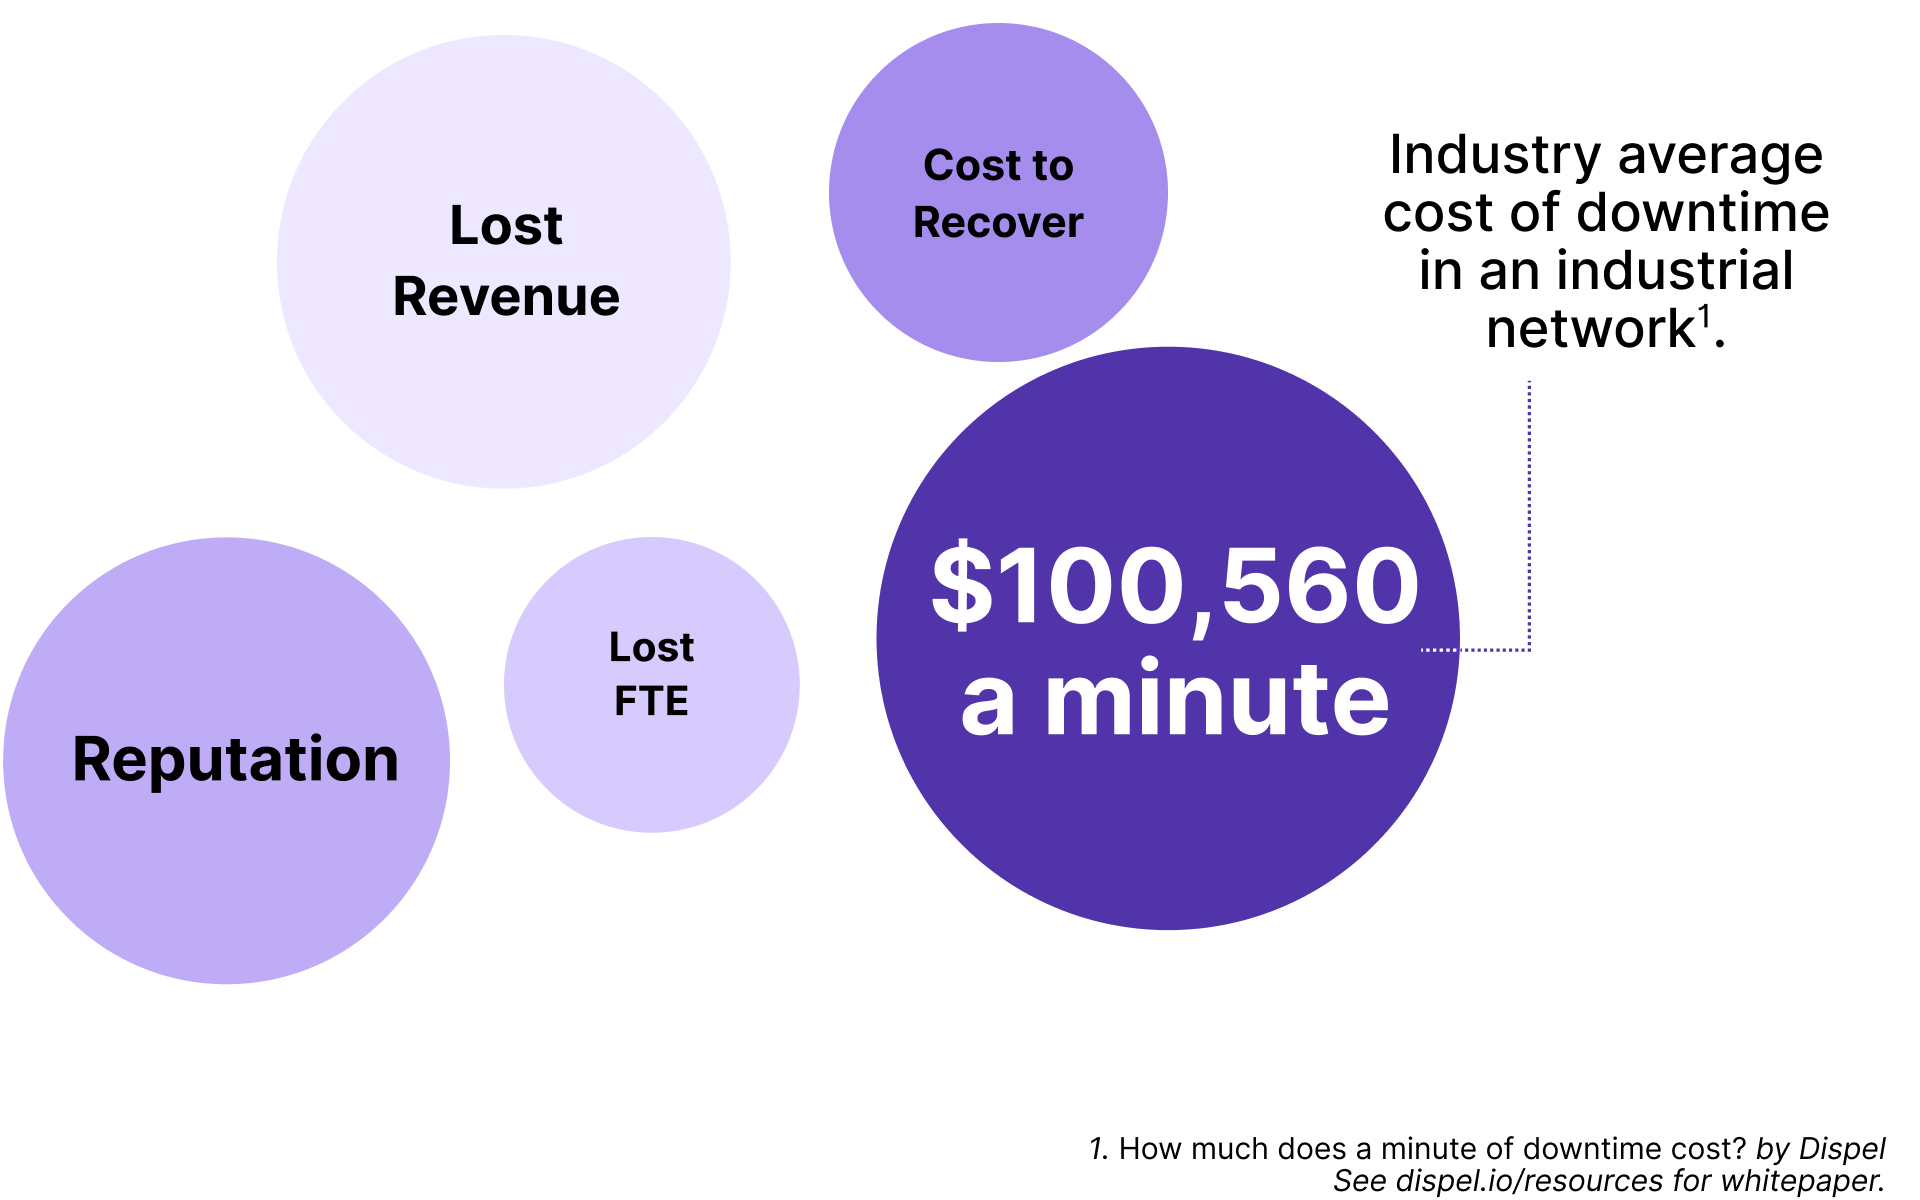 How much does 1 minute of downtime cost you?